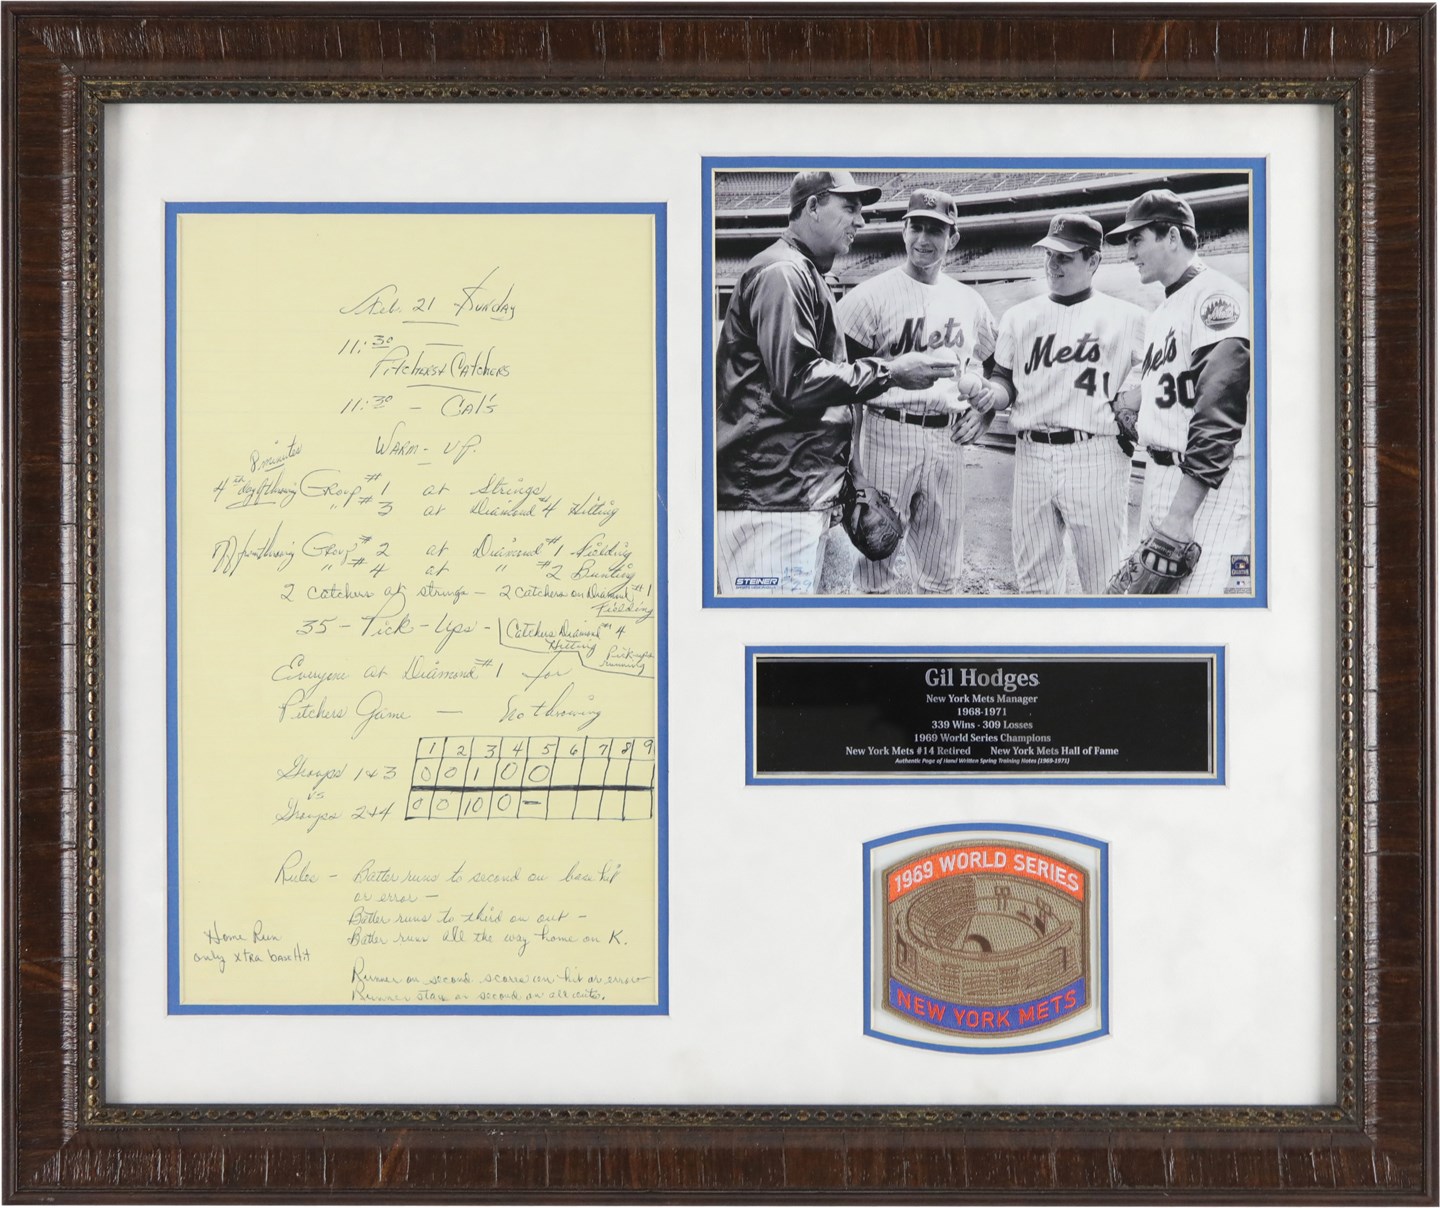 1971 Gil Hodges New York Mets Handwritten Spring Training Practice Schedule w/Family Provenance